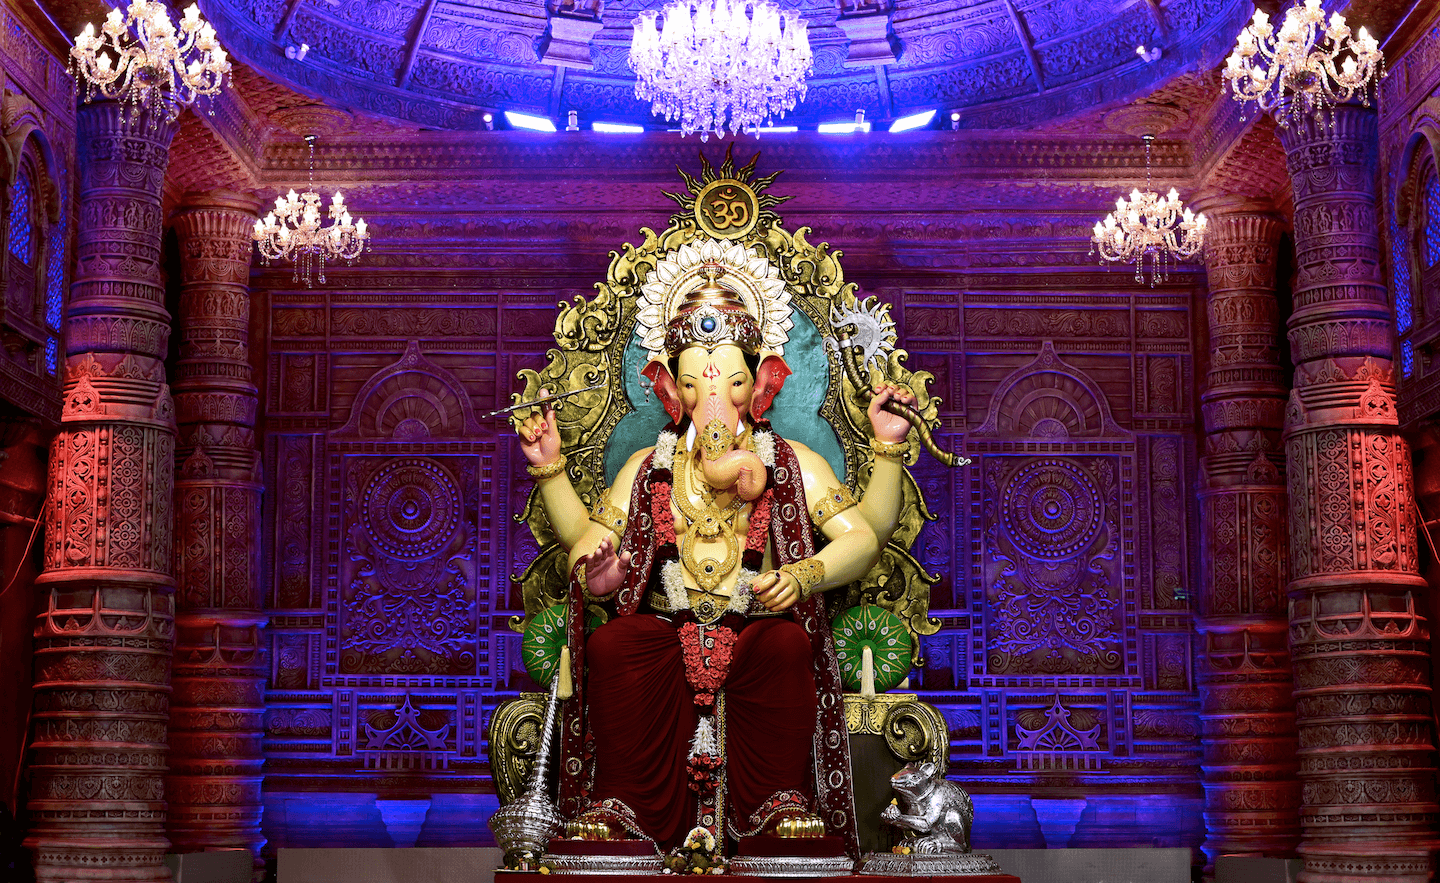 Incredible Compilation of Full 4K Lalbaugcha Raja Images – Over 999+ Remarkable Captures